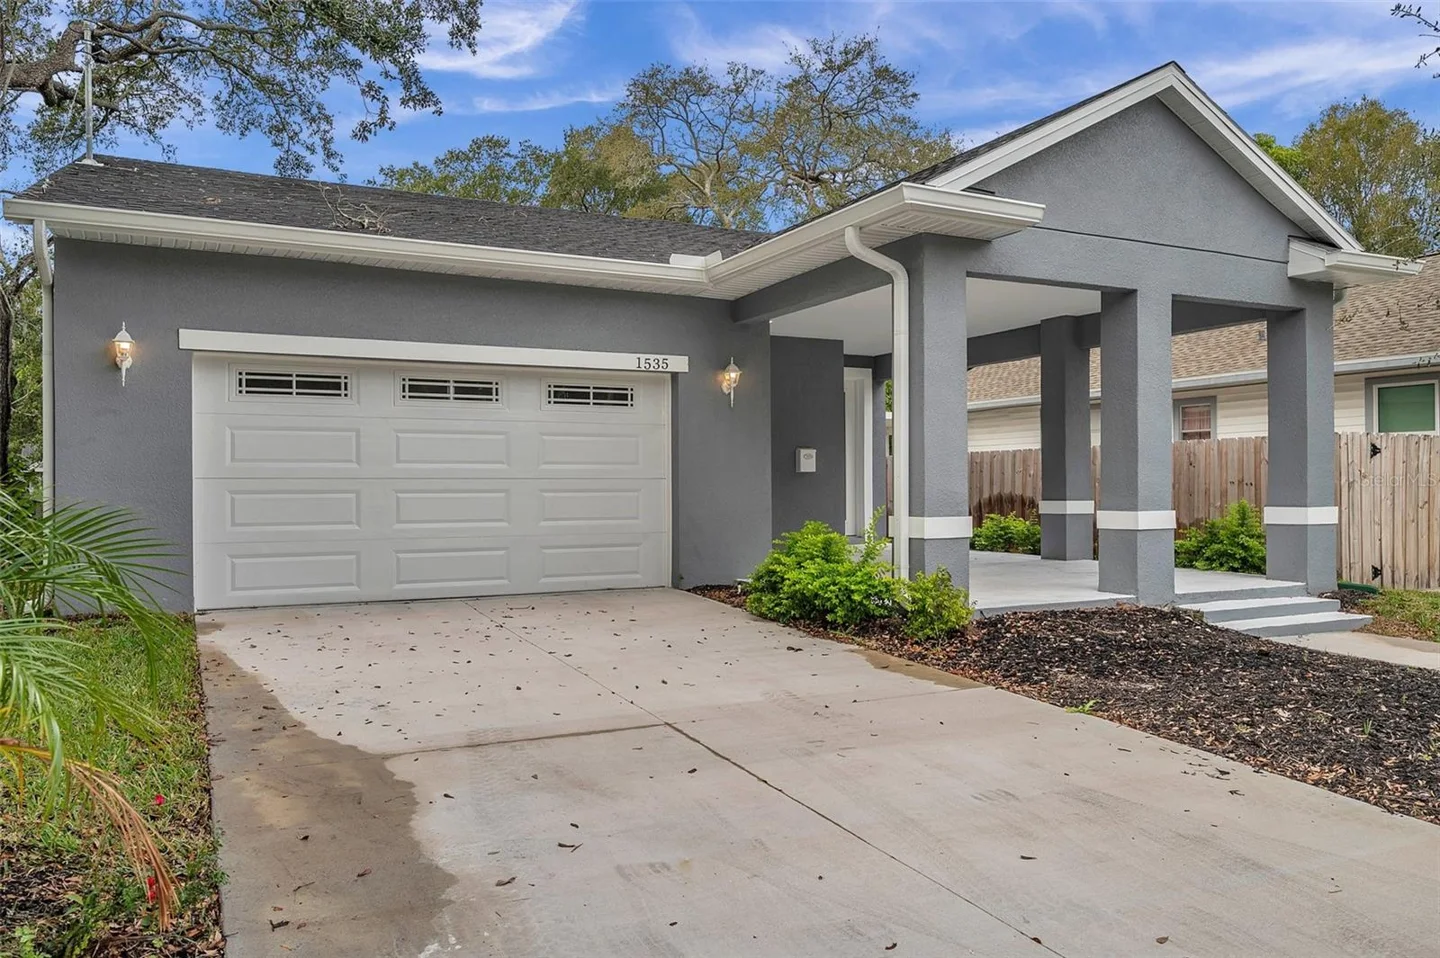 COMPLETED NEW CONSTRUCTION HOME IN DOWNTOWN ST PETE